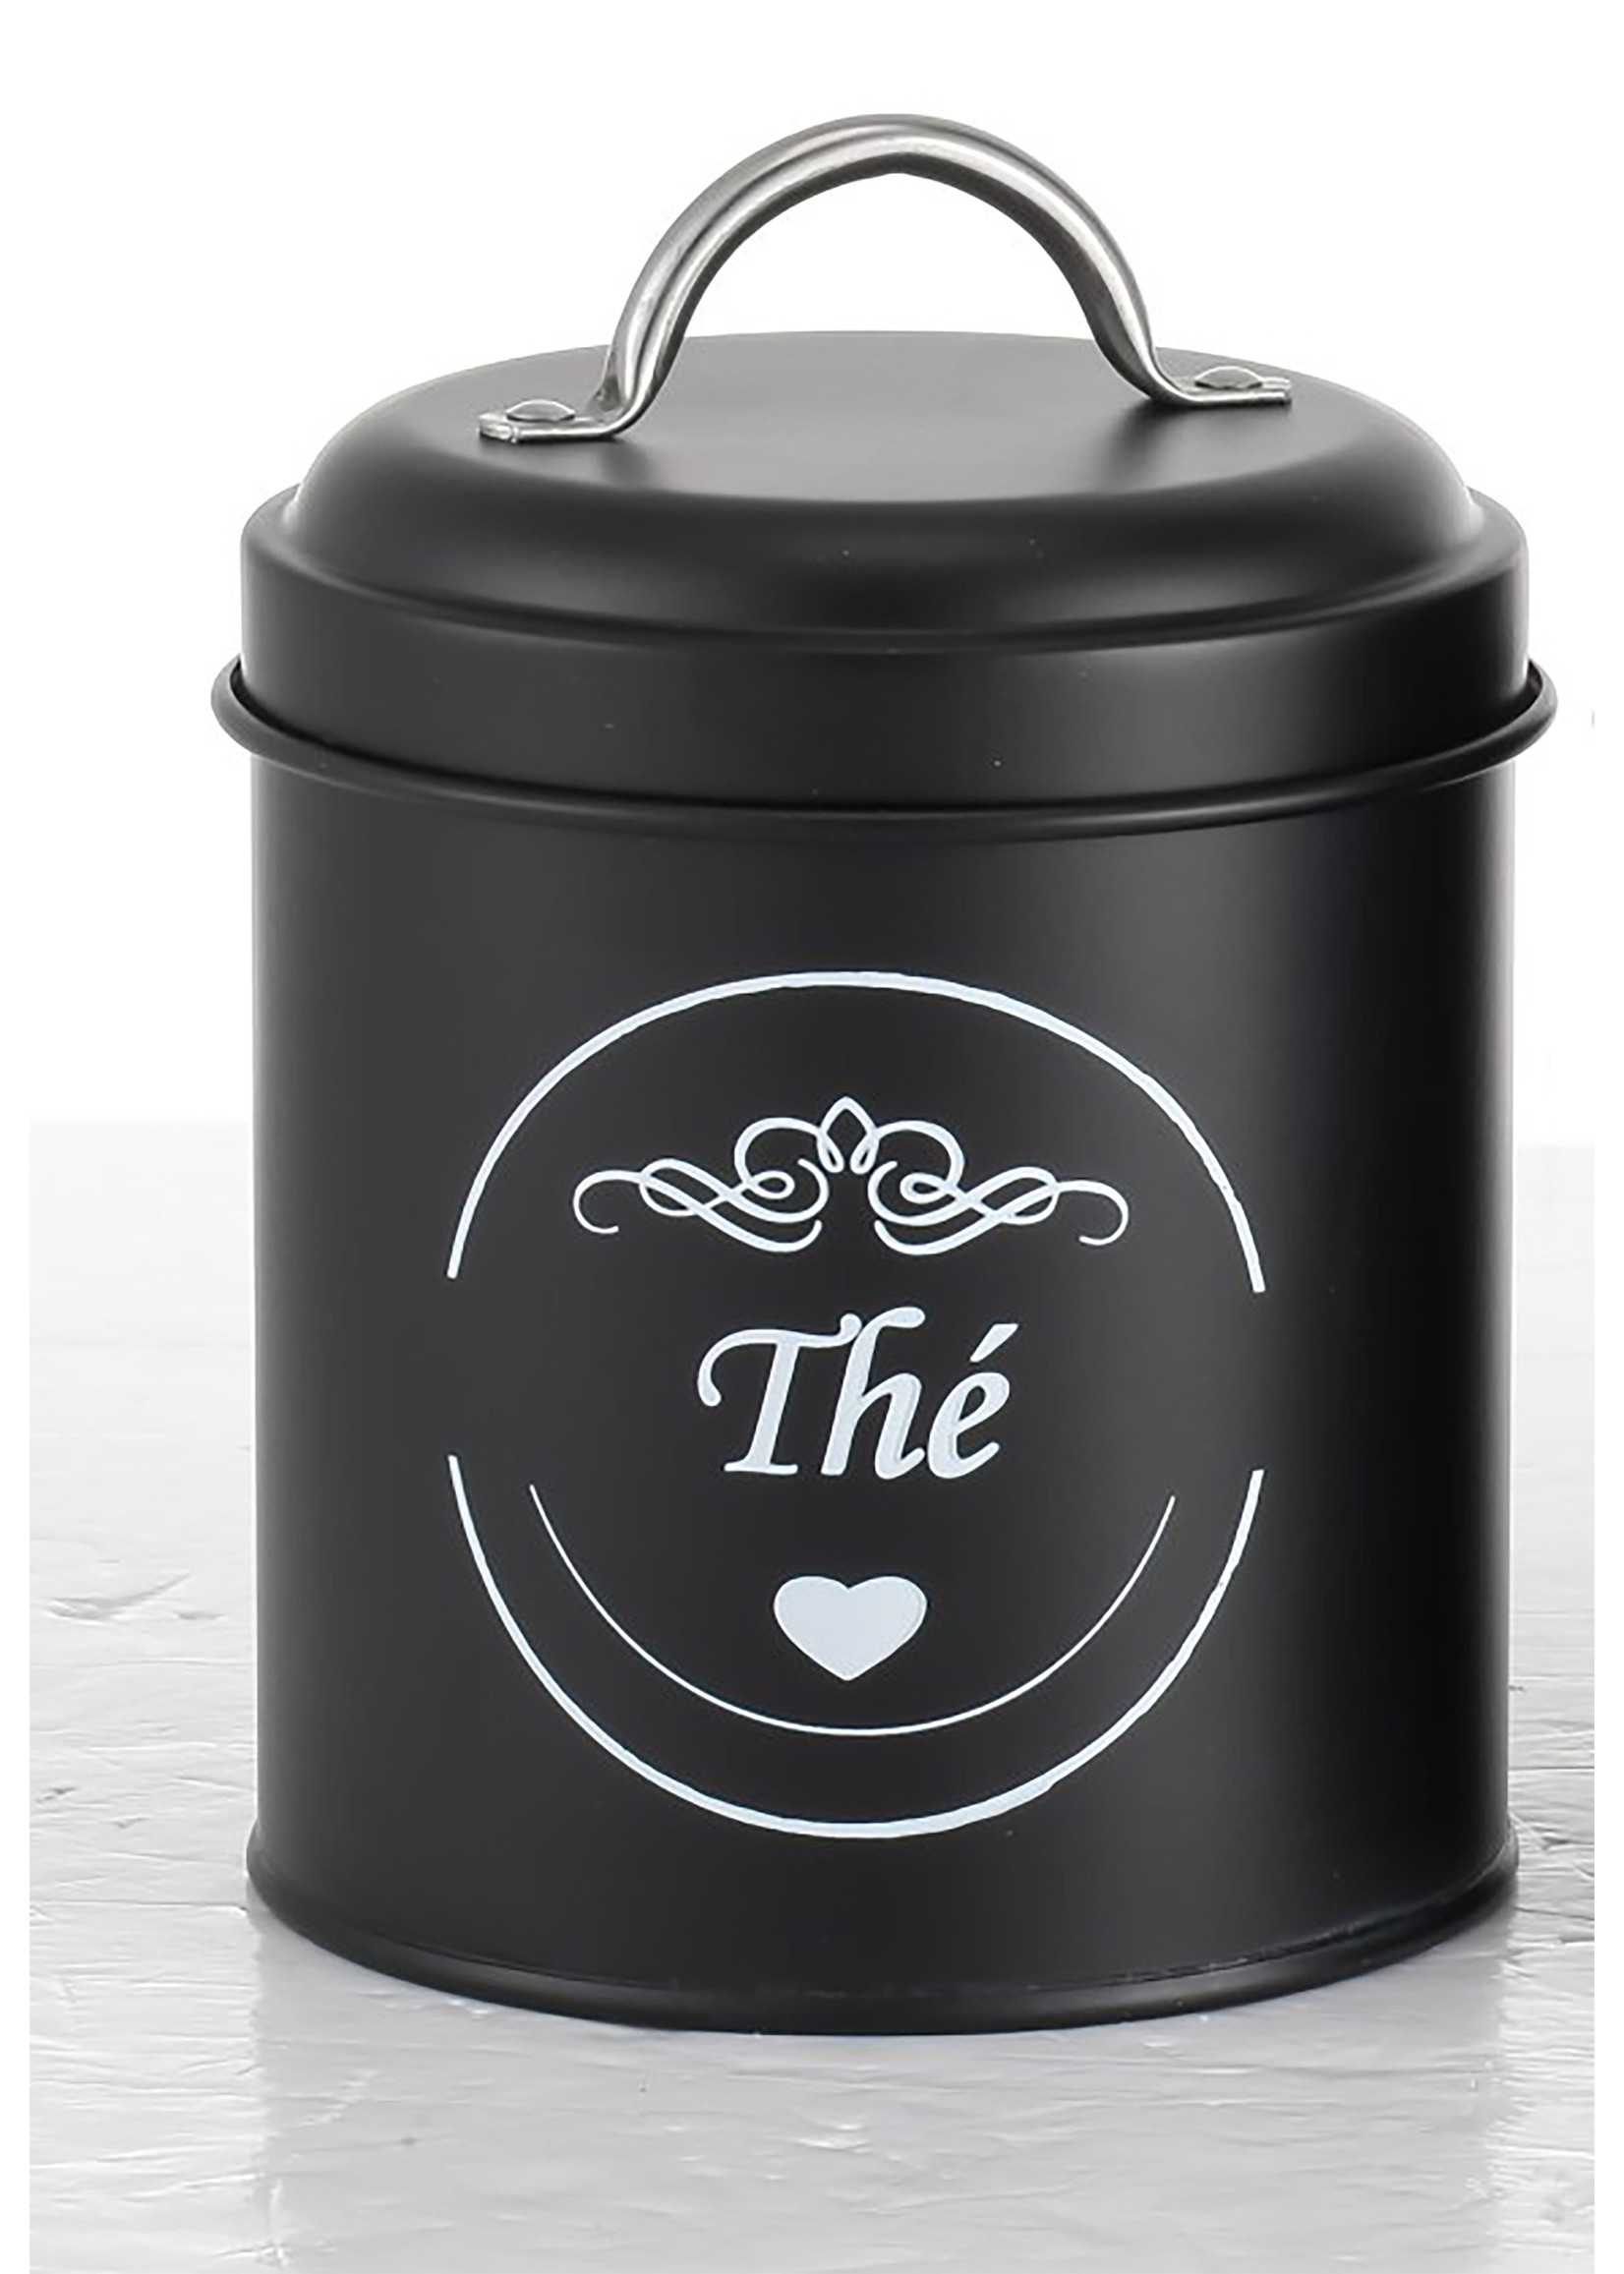 ITY INTERNATIONAL Metal Canisters with Lid, Food Storage